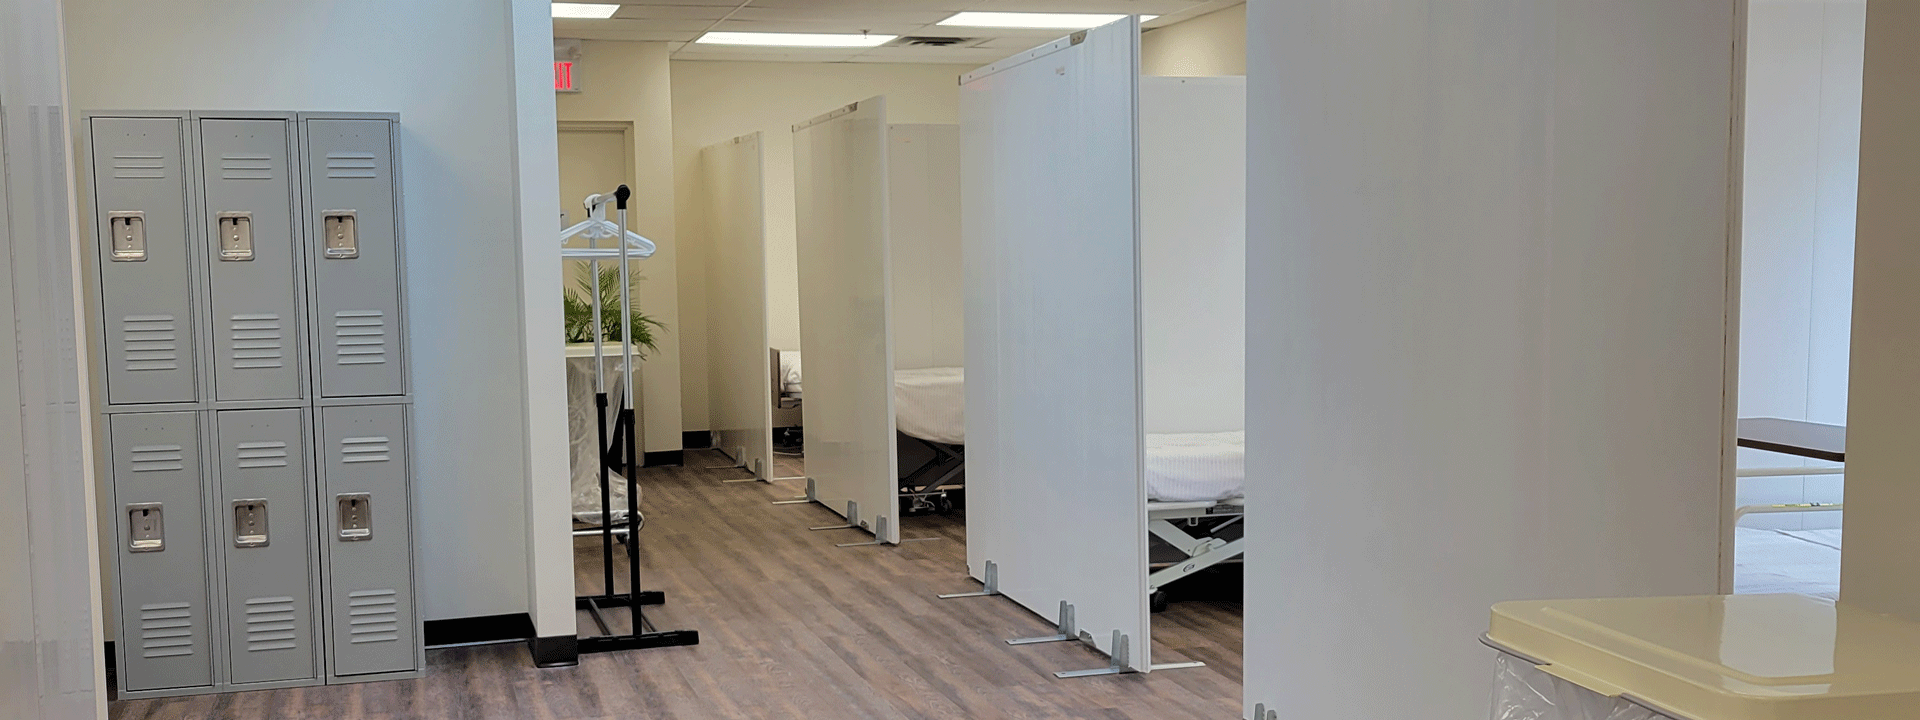 inside view of 6-bed York Region Withdrawal Management Centre